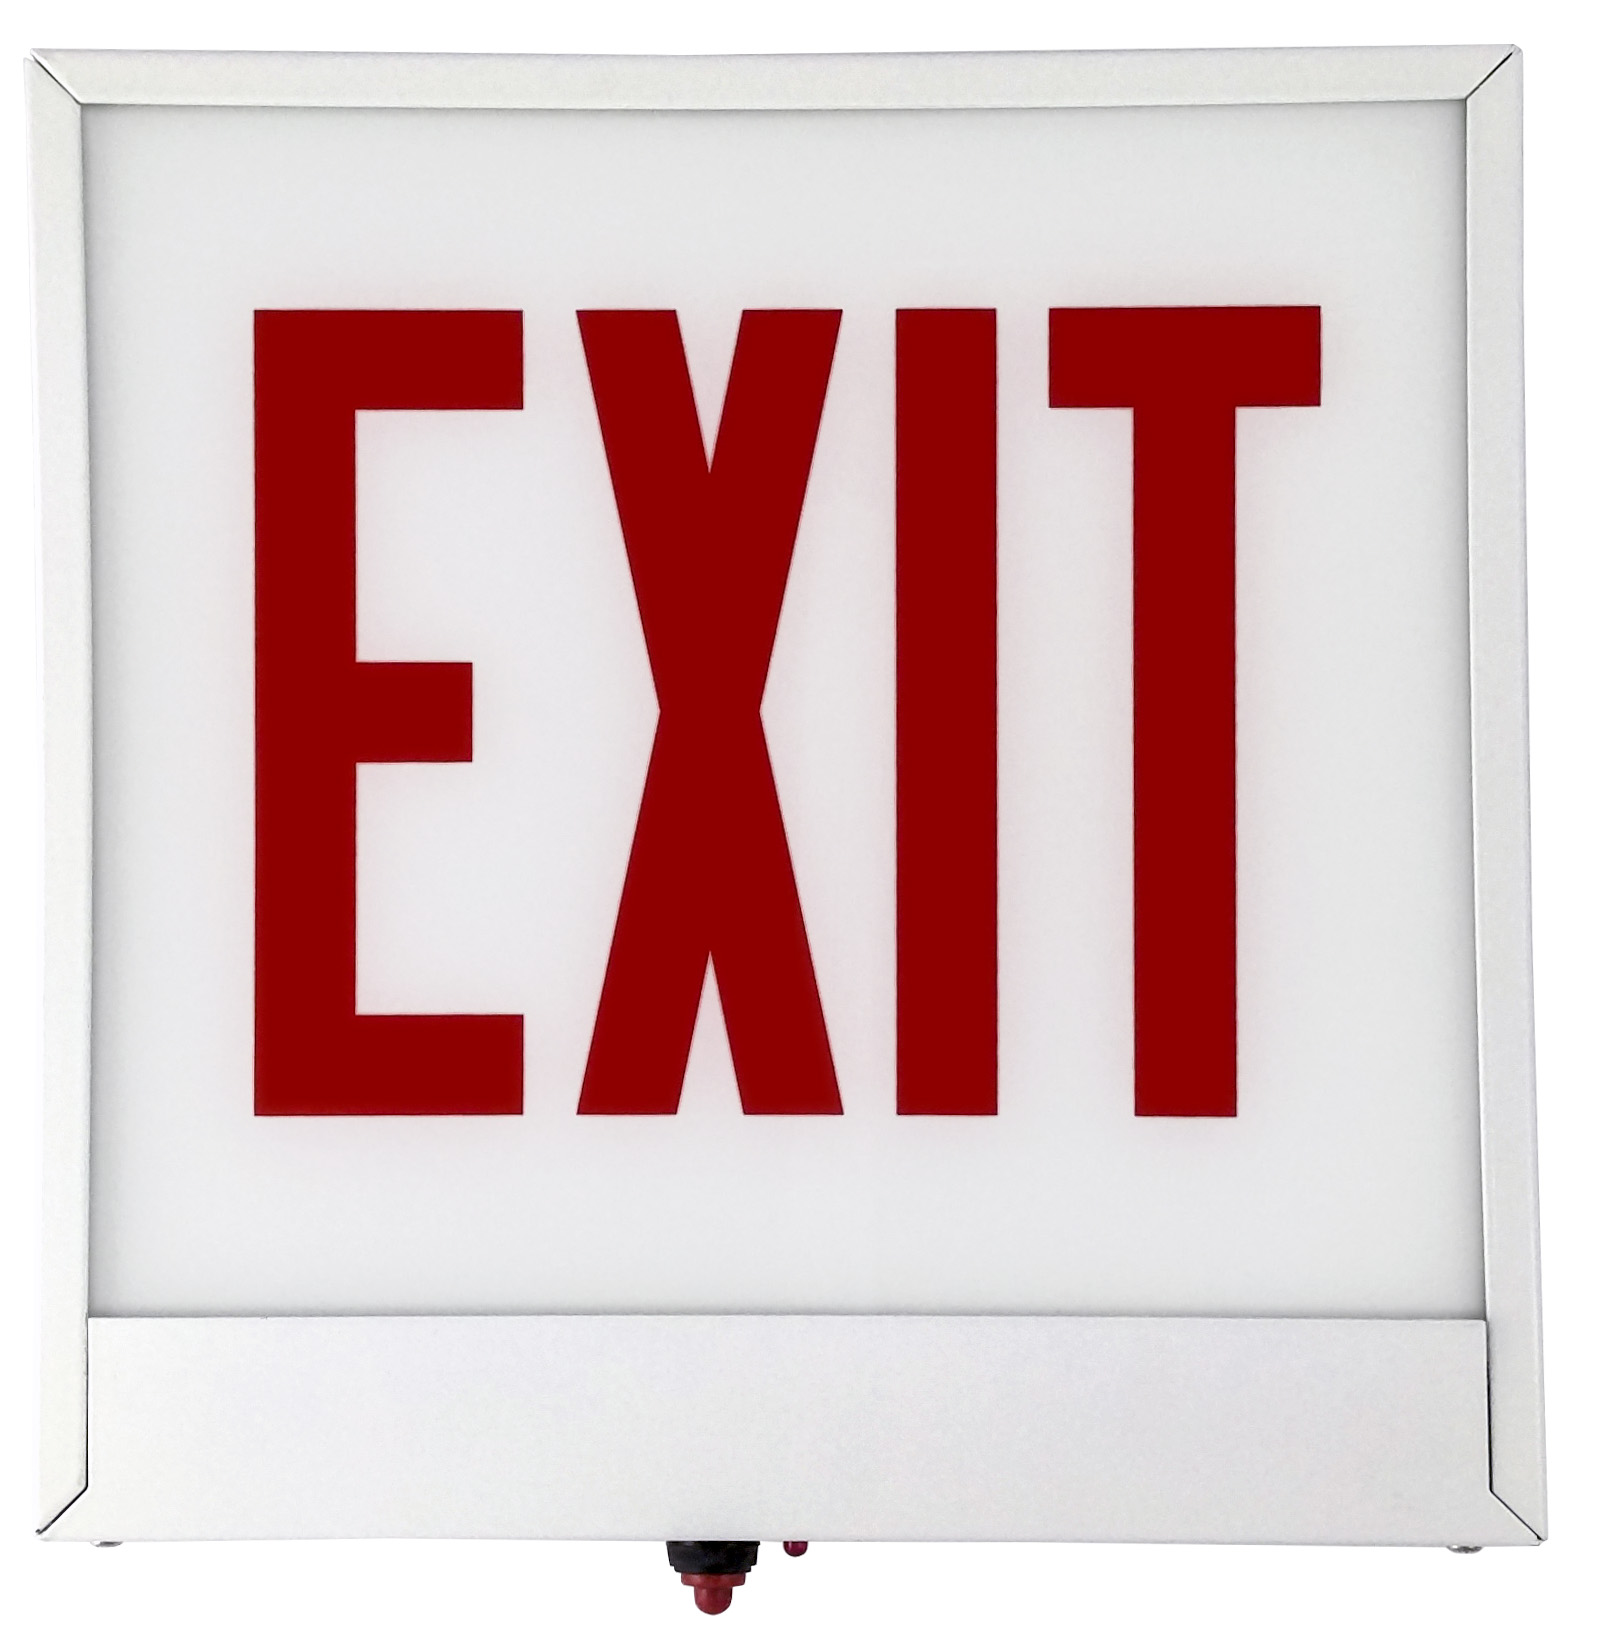 PAC0836 Chicago Code Steel LED Exit Signs